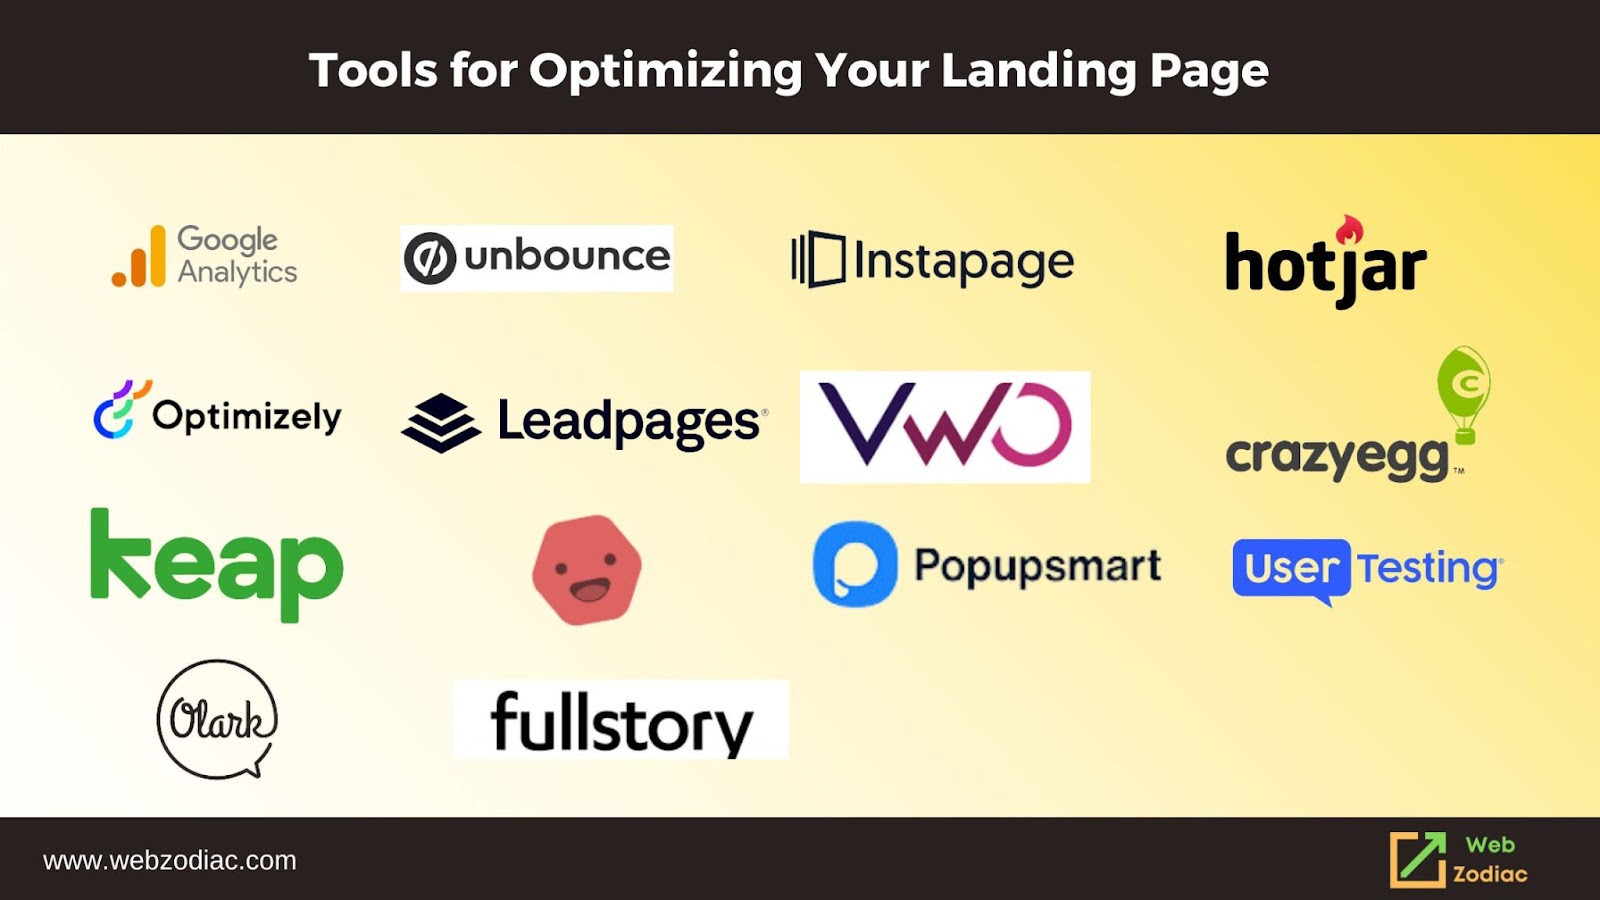 Tools list for landing page optimization image